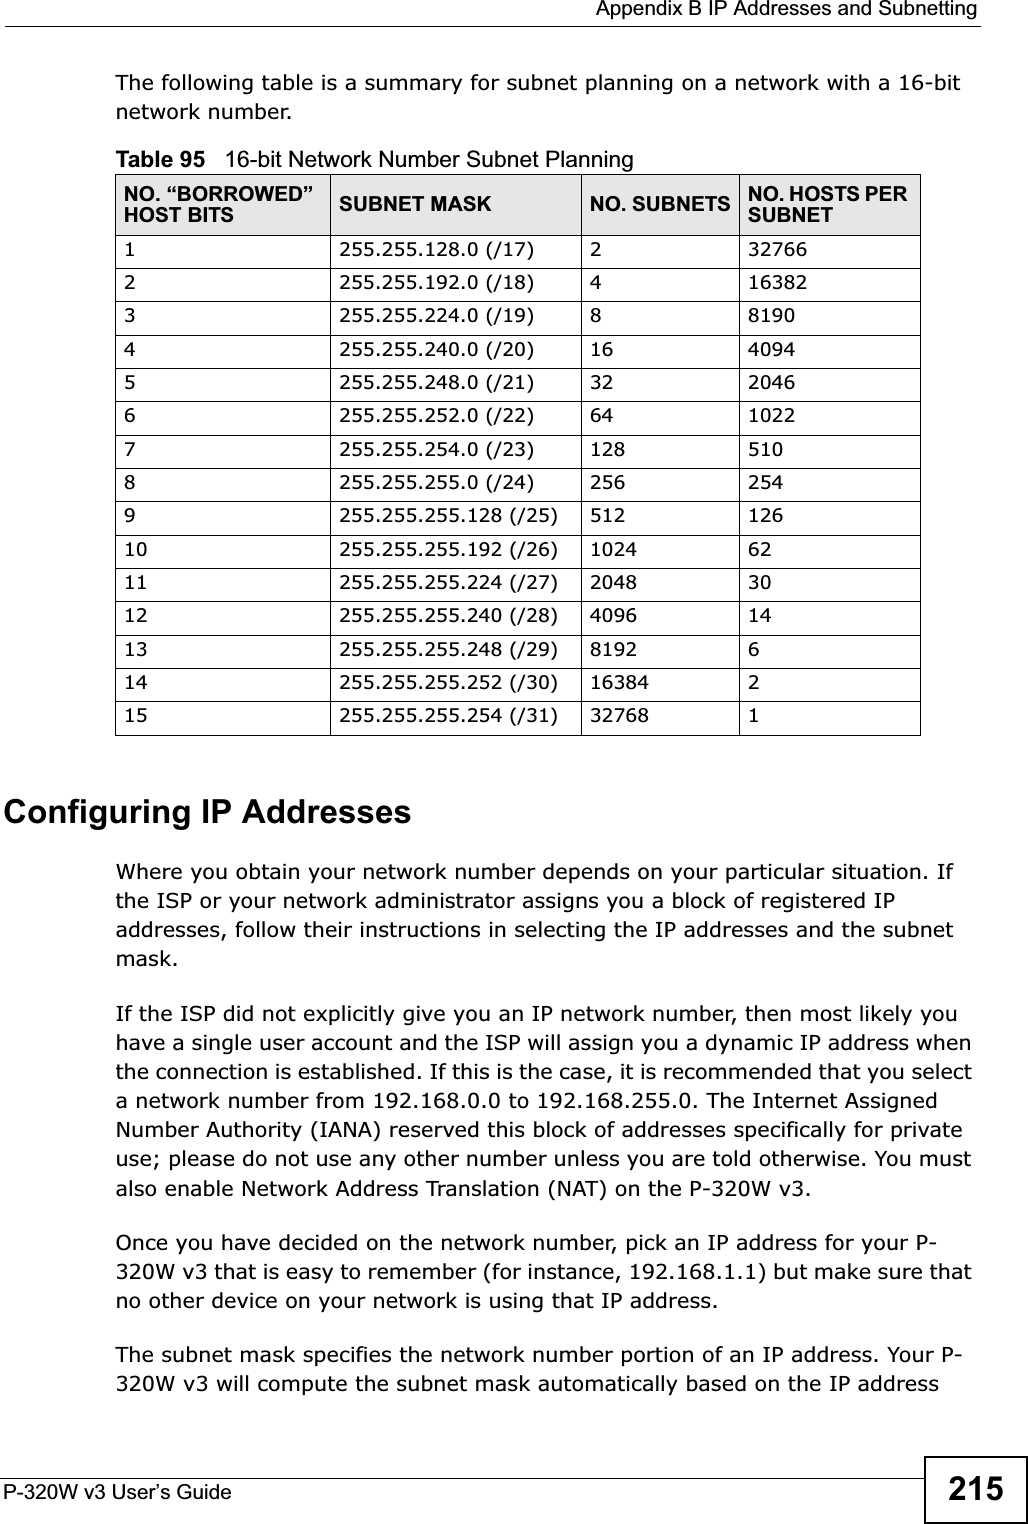  Appendix B IP Addresses and SubnettingP-320W v3 User’s Guide 215The following table is a summary for subnet planning on a network with a 16-bit network number. Configuring IP AddressesWhere you obtain your network number depends on your particular situation. If the ISP or your network administrator assigns you a block of registered IP addresses, follow their instructions in selecting the IP addresses and the subnet mask.If the ISP did not explicitly give you an IP network number, then most likely you have a single user account and the ISP will assign you a dynamic IP address when the connection is established. If this is the case, it is recommended that you select a network number from 192.168.0.0 to 192.168.255.0. The Internet Assigned Number Authority (IANA) reserved this block of addresses specifically for private use; please do not use any other number unless you are told otherwise. You must also enable Network Address Translation (NAT) on the P-320W v3. Once you have decided on the network number, pick an IP address for your P-320W v3 that is easy to remember (for instance, 192.168.1.1) but make sure that no other device on your network is using that IP address.The subnet mask specifies the network number portion of an IP address. Your P-320W v3 will compute the subnet mask automatically based on the IP address Table 95   16-bit Network Number Subnet PlanningNO. “BORROWED” HOST BITS SUBNET MASK NO. SUBNETS NO. HOSTS PER SUBNET1255.255.128.0 (/17) 2327662255.255.192.0 (/18) 4163823255.255.224.0 (/19) 881904255.255.240.0 (/20) 16 40945255.255.248.0 (/21) 32 20466255.255.252.0 (/22) 64 10227255.255.254.0 (/23) 128 5108255.255.255.0 (/24) 256 2549255.255.255.128 (/25) 512 12610 255.255.255.192 (/26) 1024 6211 255.255.255.224 (/27) 2048 3012 255.255.255.240 (/28) 4096 1413 255.255.255.248 (/29) 8192 614 255.255.255.252 (/30) 16384 215 255.255.255.254 (/31) 32768 1